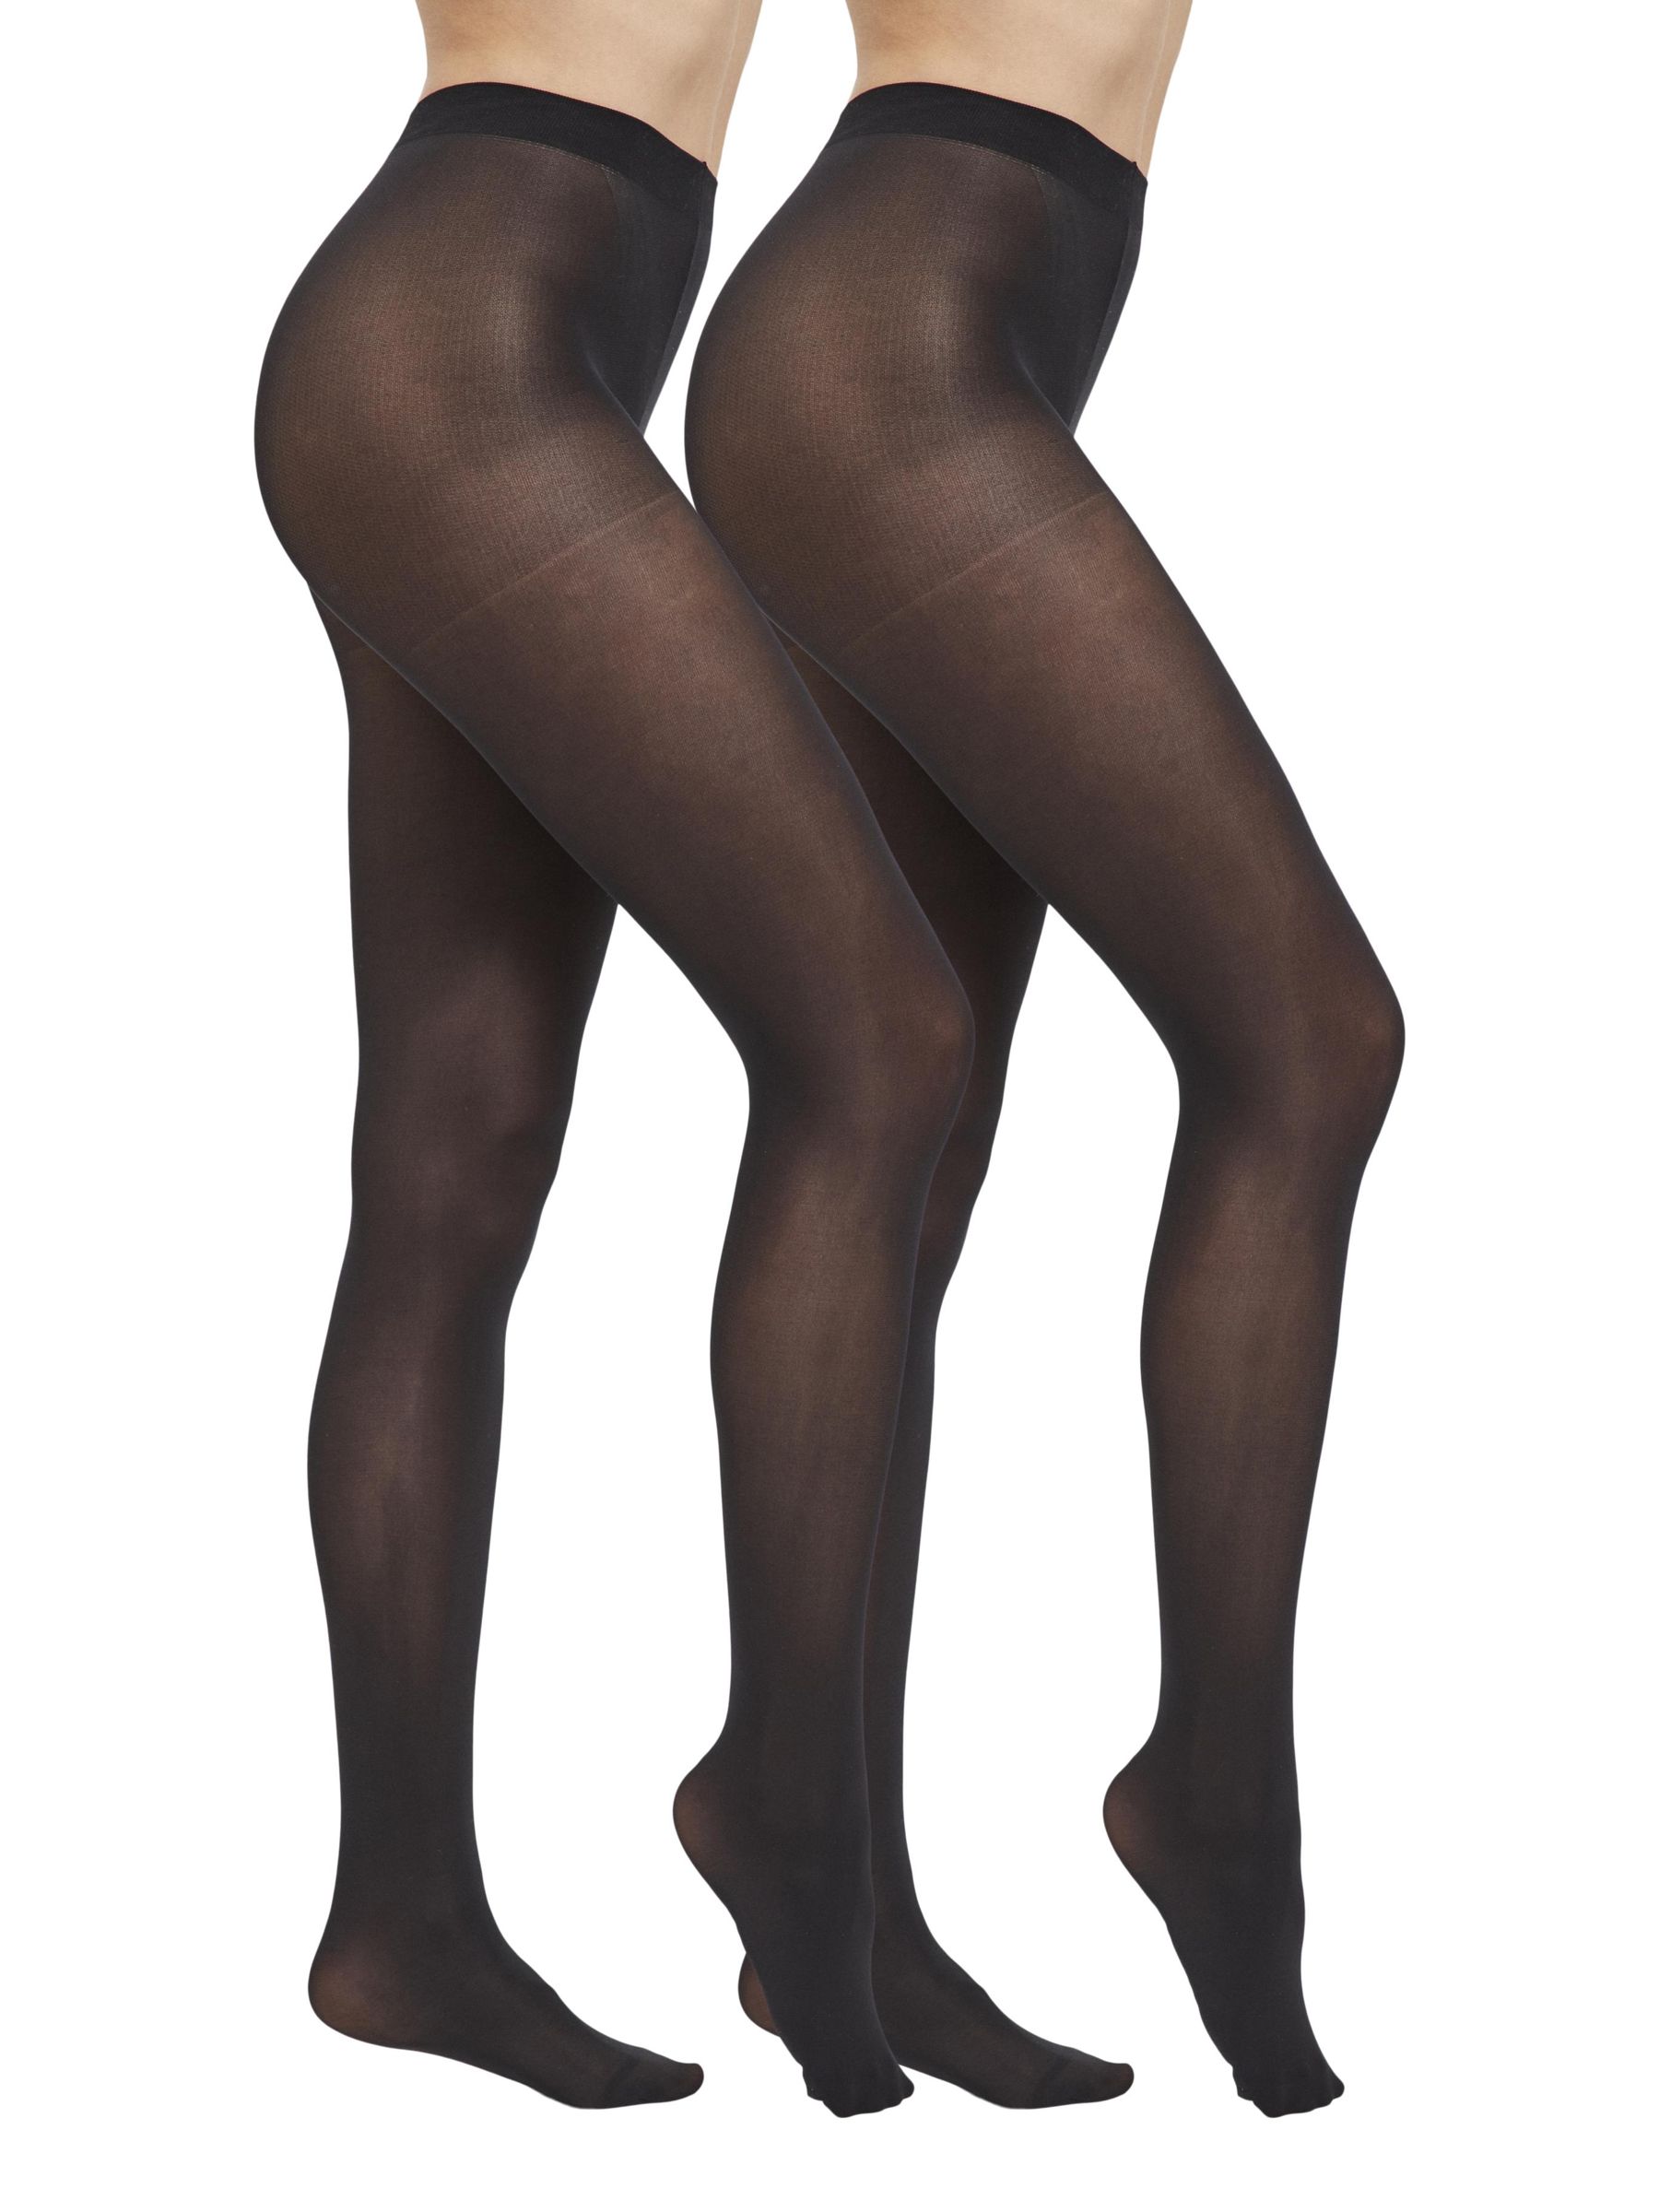 Pack of 2 pairs of 70 denier tights - Tights - ACCESSORIES - Woman